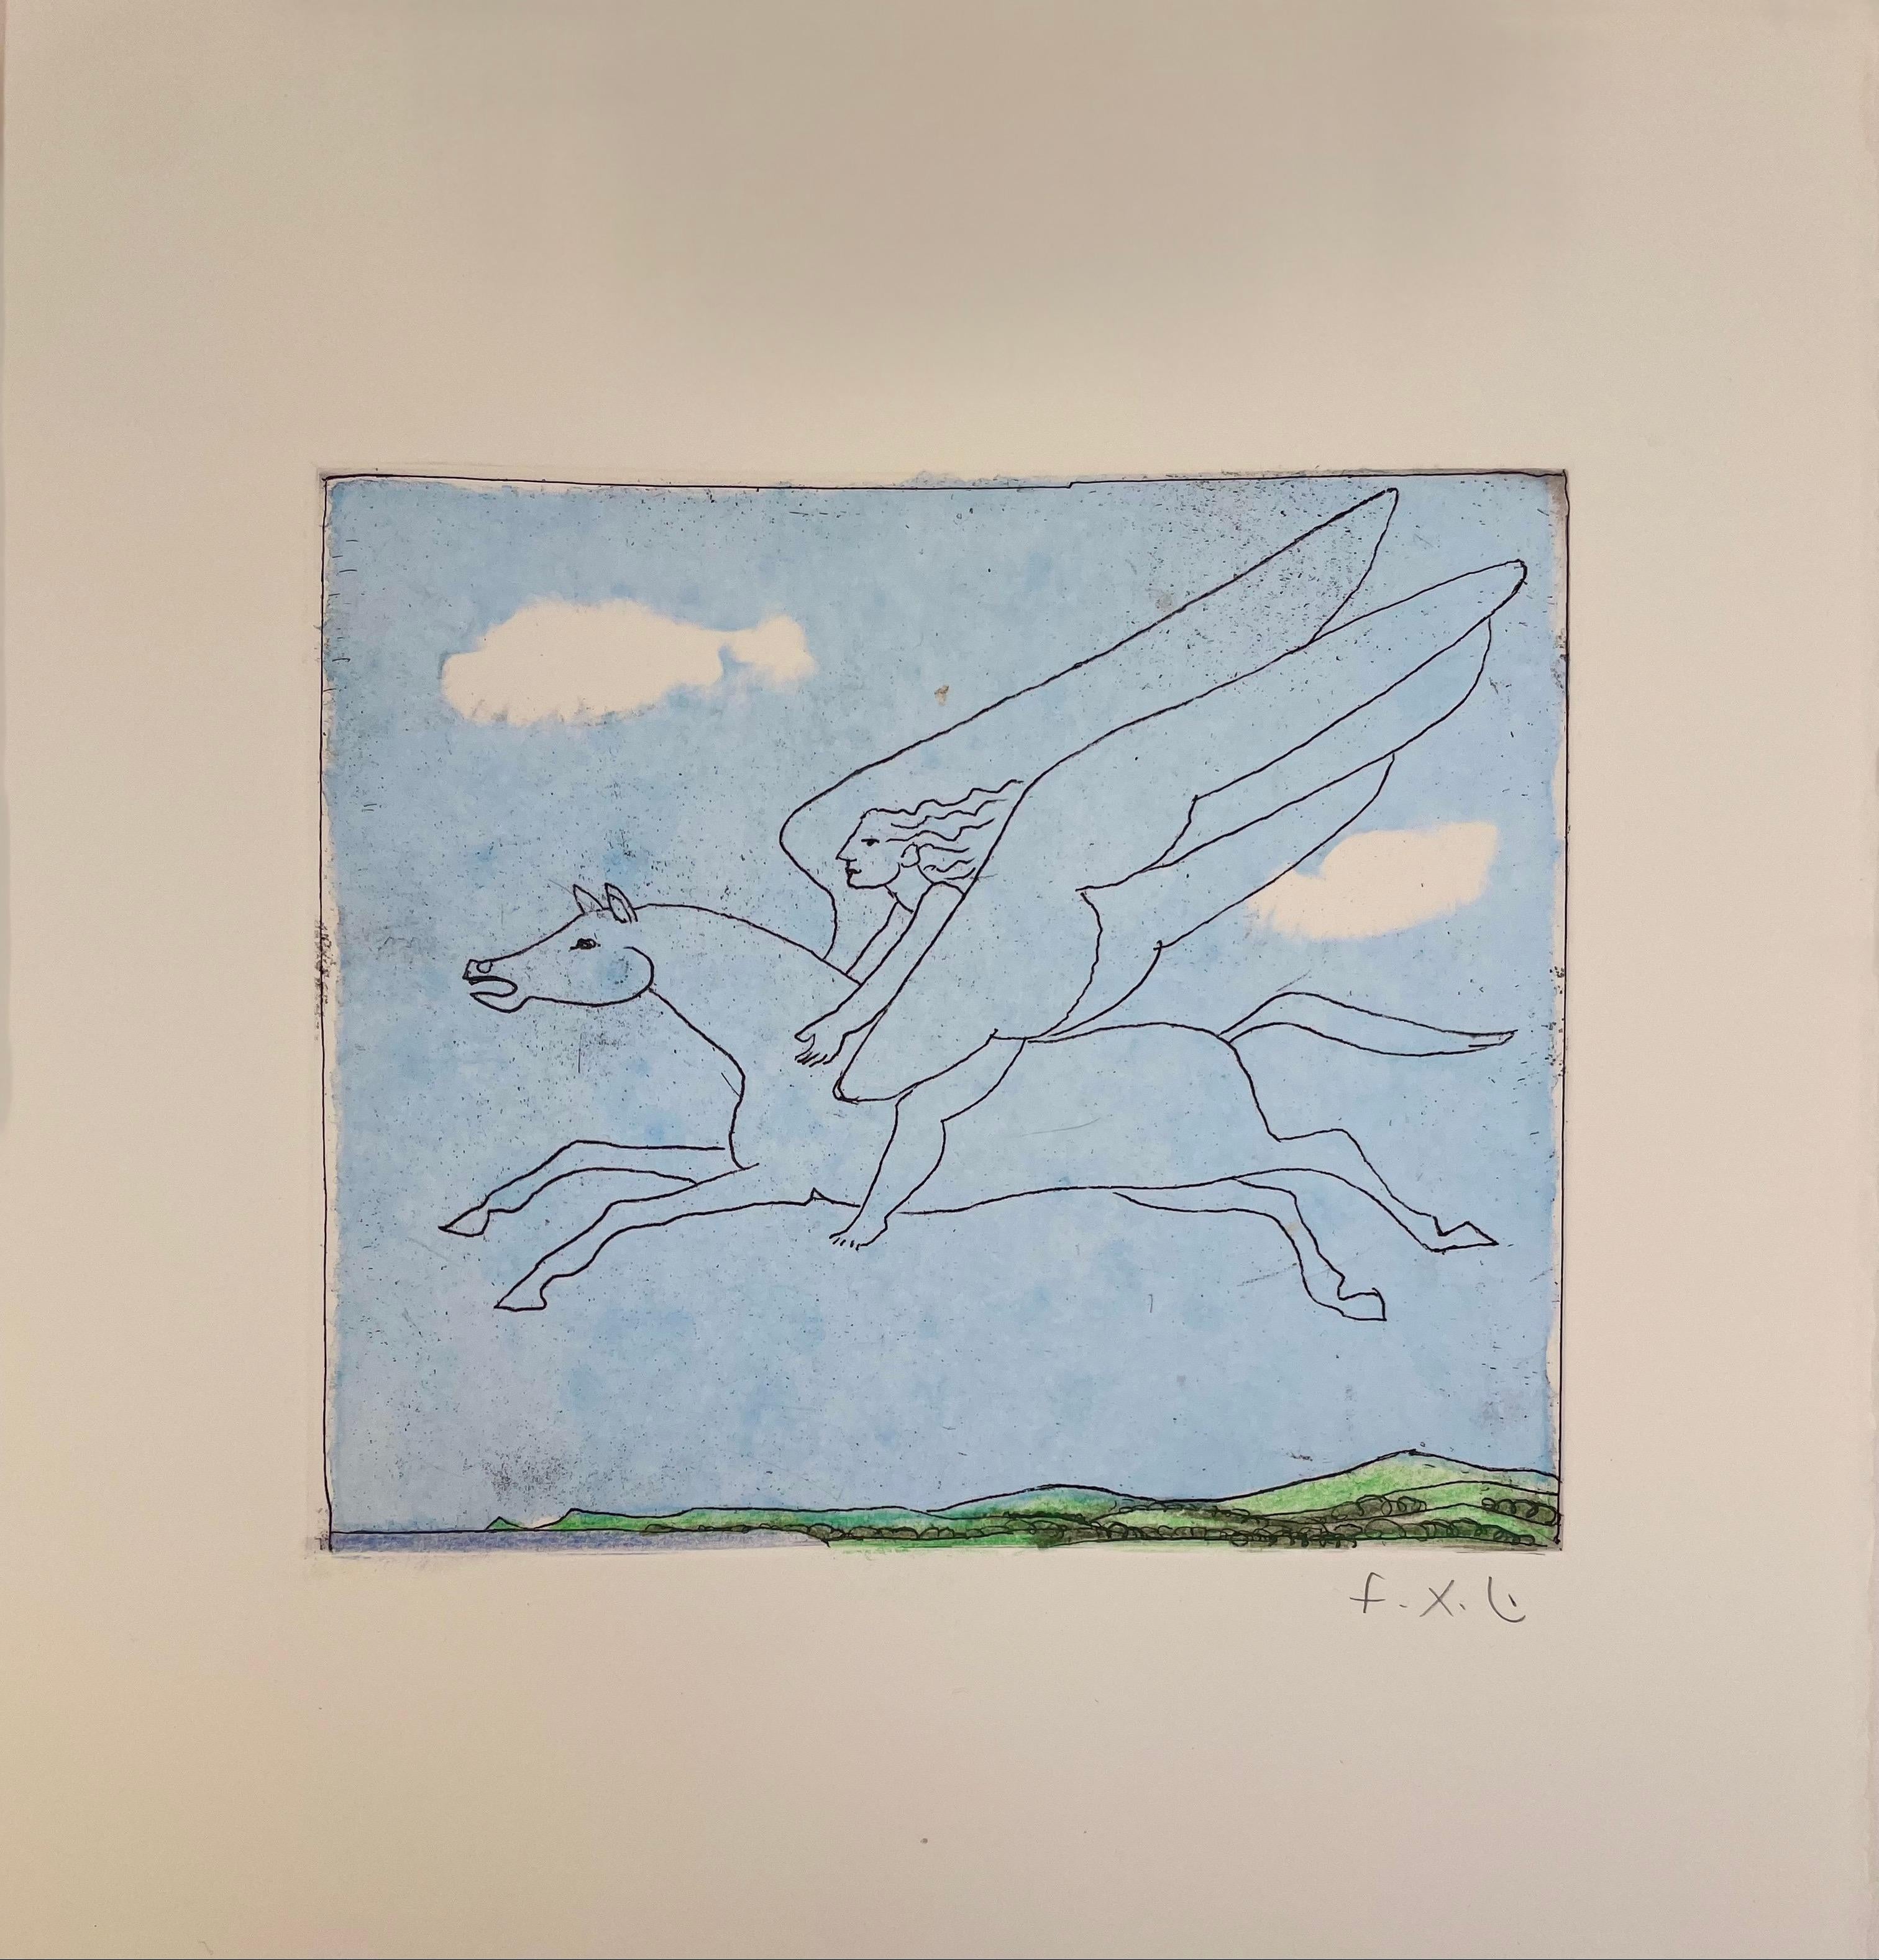 François-Xavier Lalanne (1927-2008) Pegasus, 2005 
Techniques : watercolored aquatint and soft varnish on paper, hand signed in pencil by François Xavier Lalanne, in perfect condition 
Dimensions of the paper : 38 x 28 cm (14,96 x 11 inches)